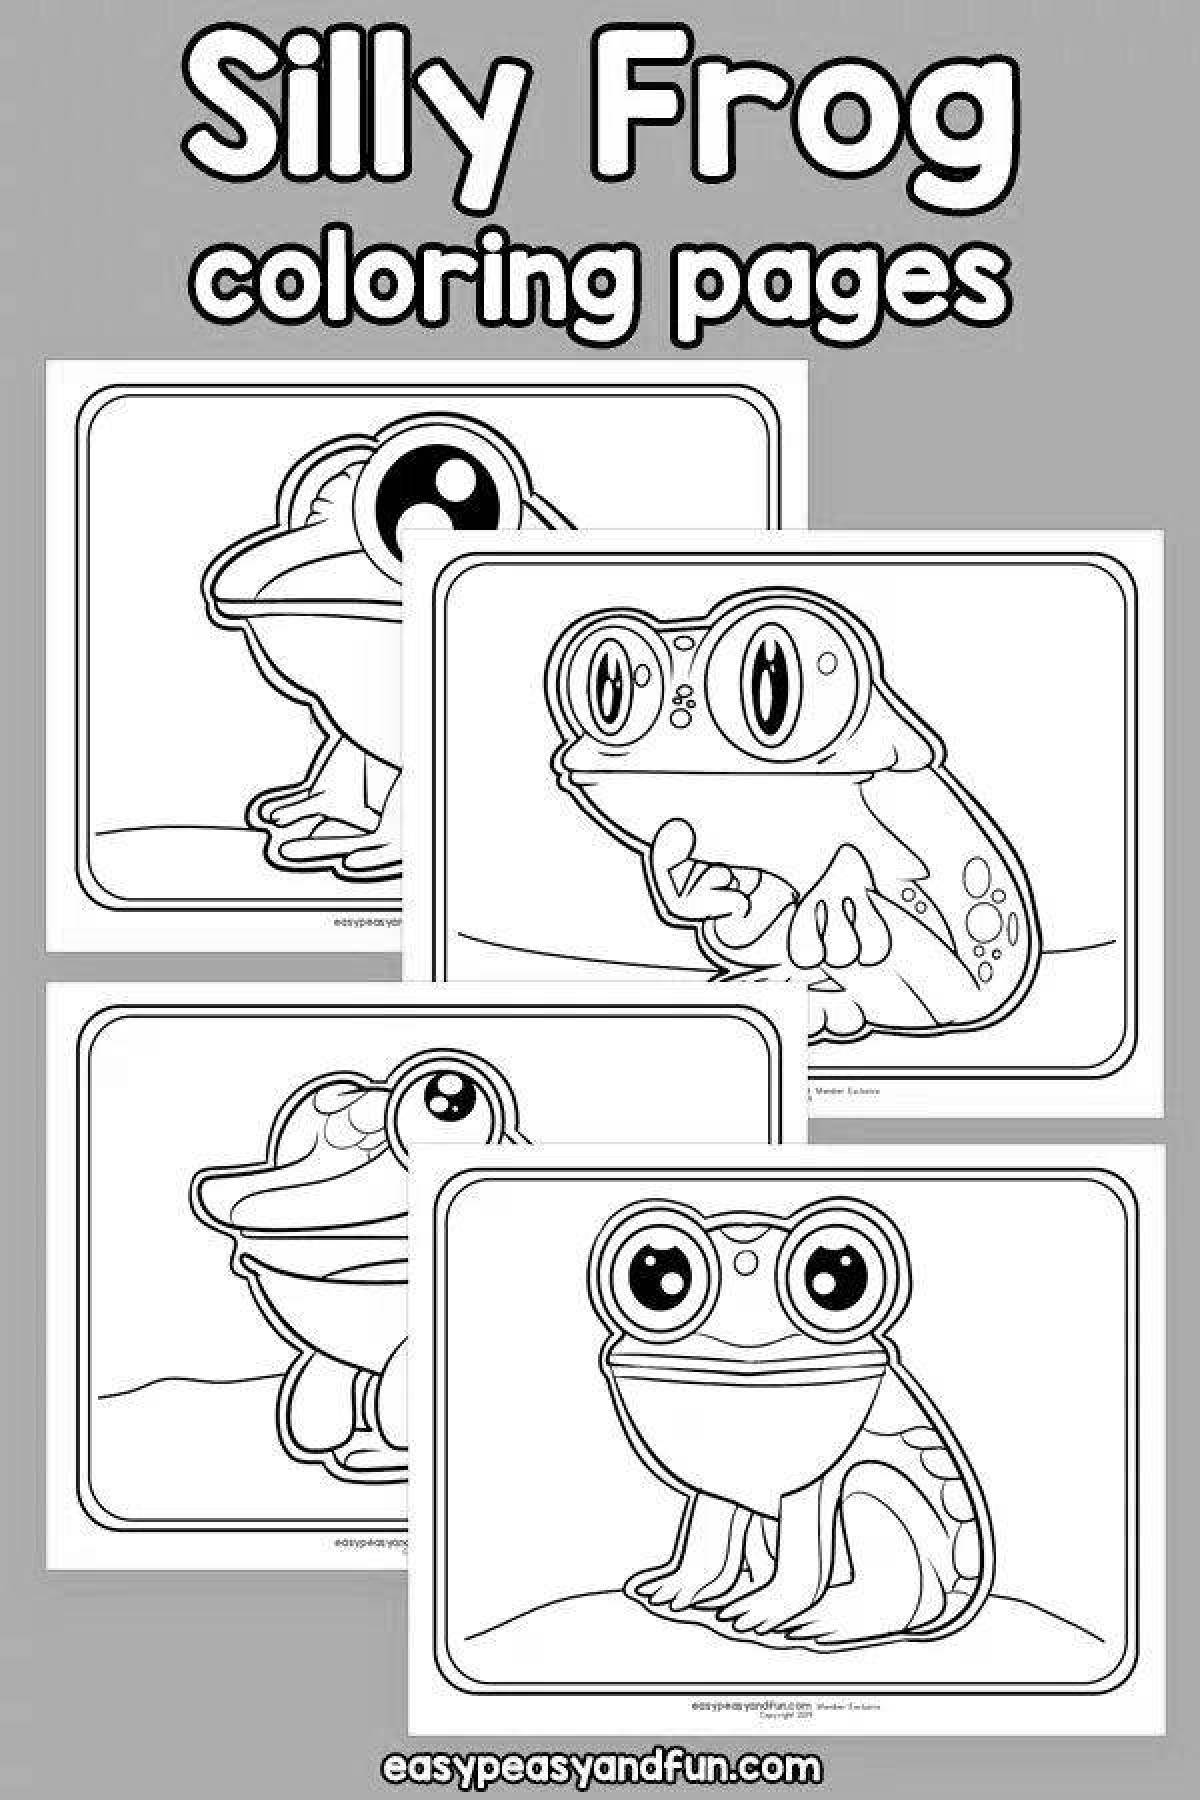 Exquisite crazy frog coloring page